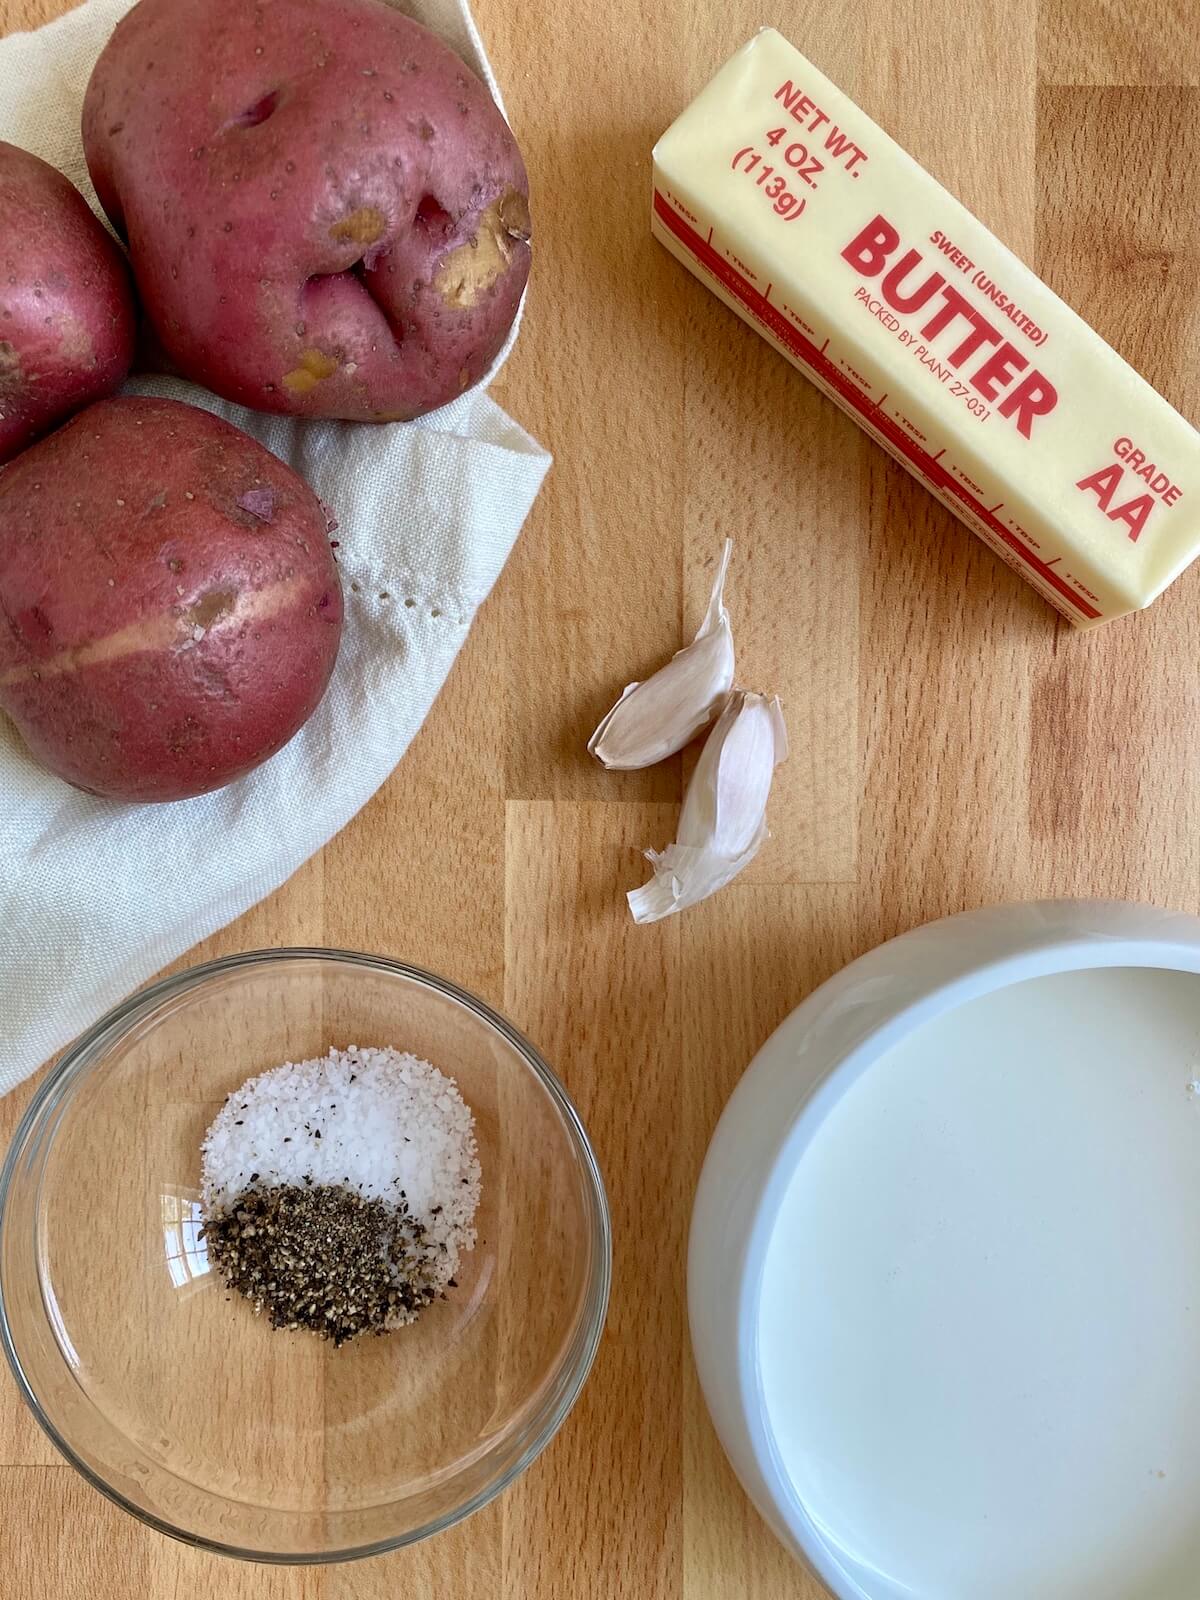 Three whole raw red potatoes, a stick of butter, two unpeeled cloves of garlic, a clear glass bowl with kosher salt and black pepper, and a white bowl filled with light cream are displayed on a butcher block countertop.